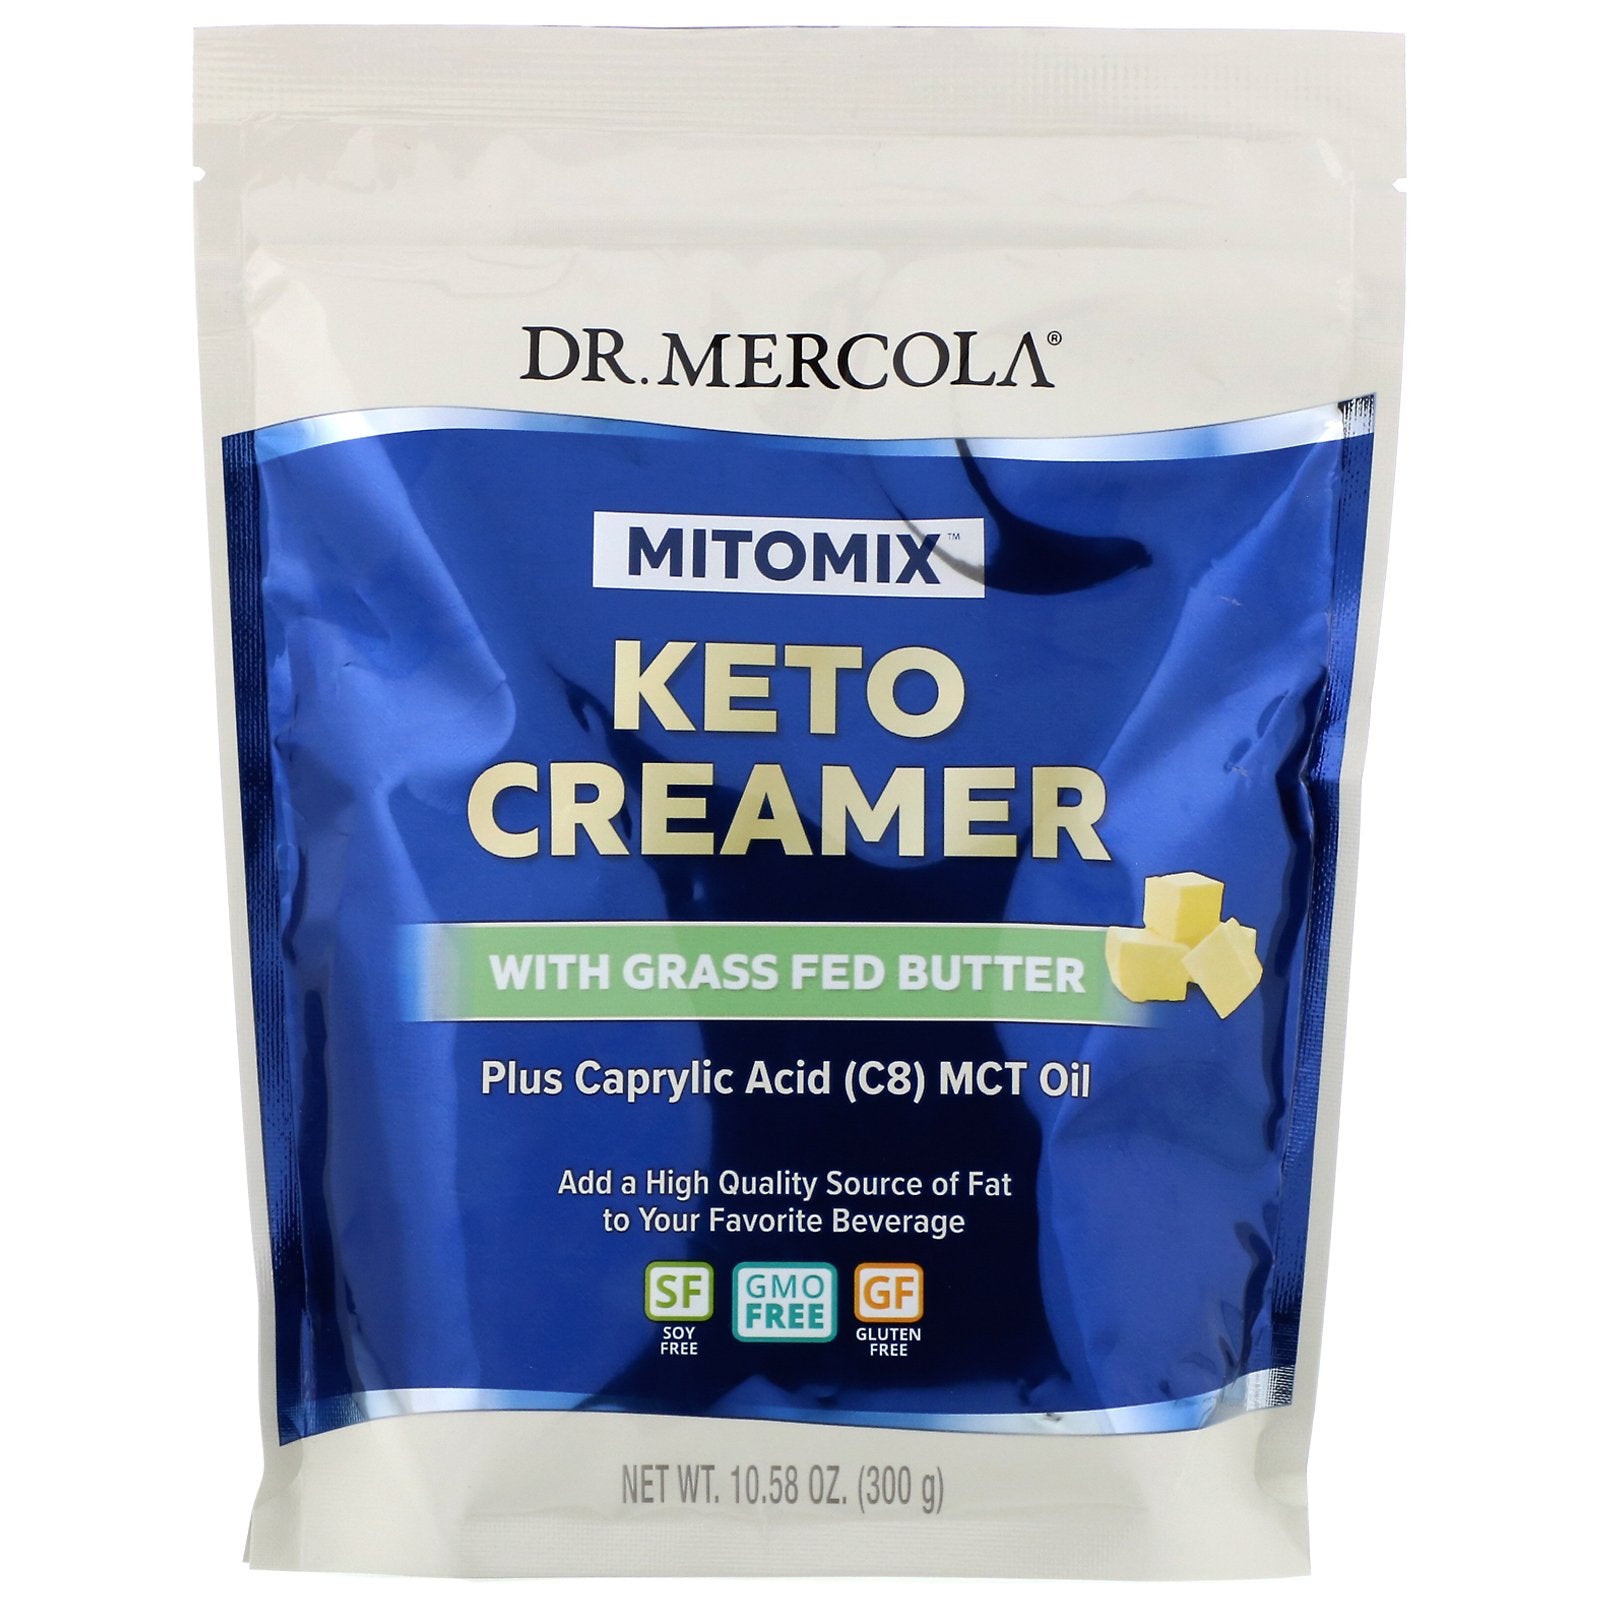 Dr. Mercola, Mitomix, Keto Creamer with Grass Fed Butter